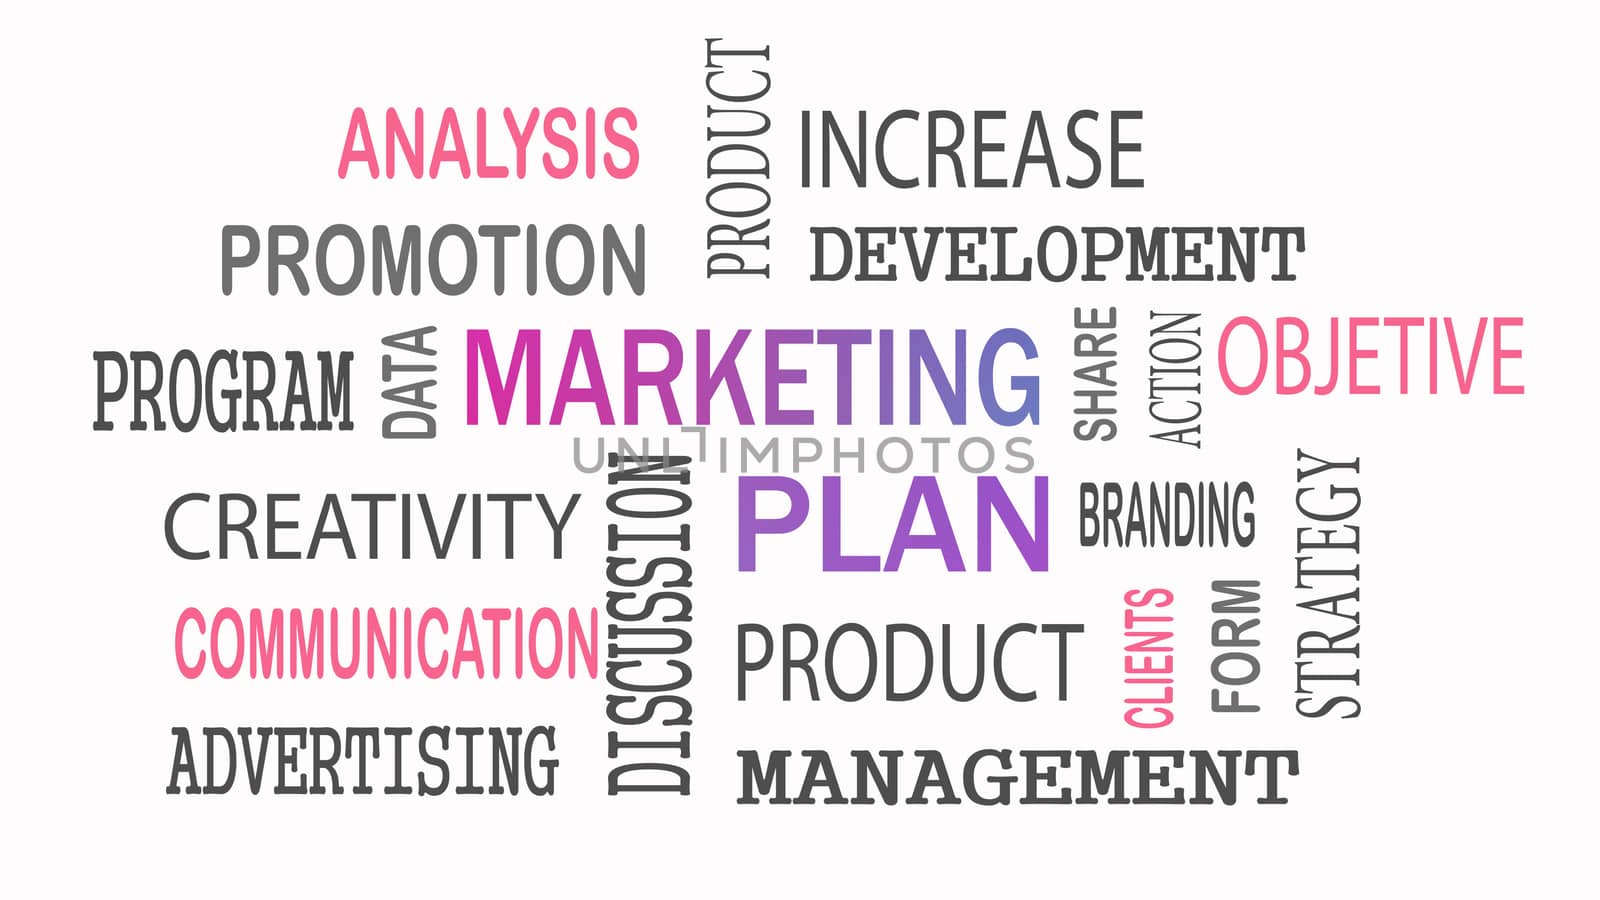 Marketing Plan word cloud concept on white background.